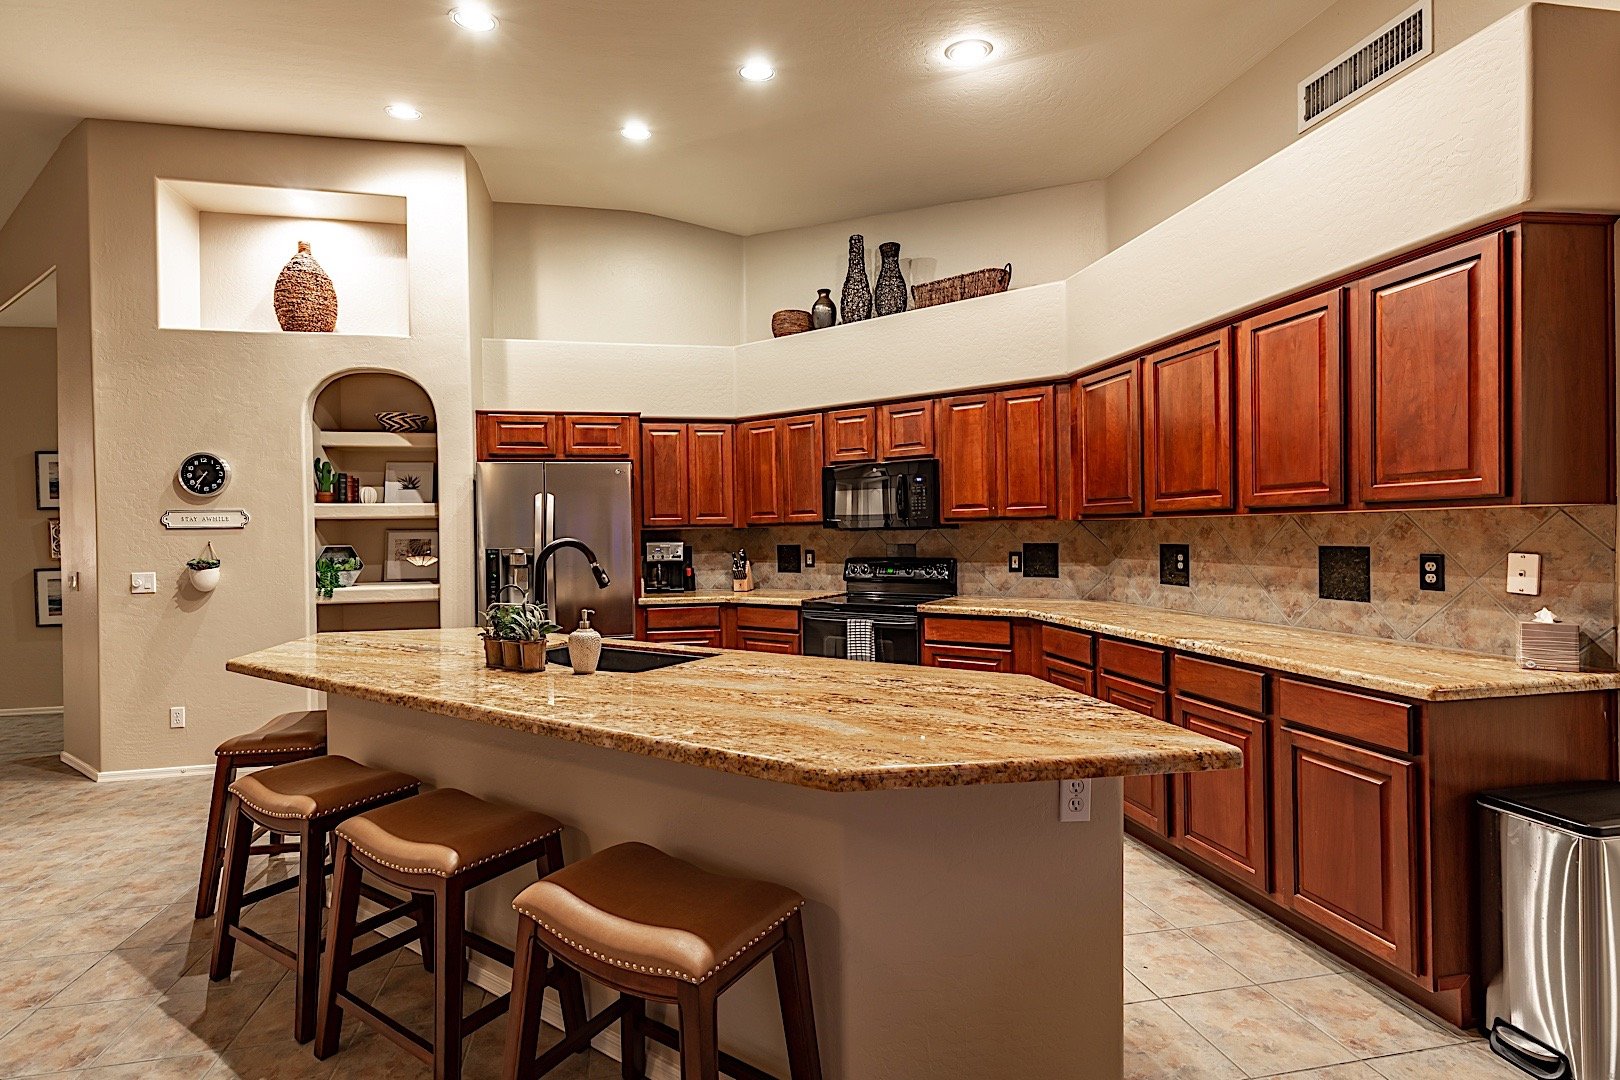 Fully equipped kitchen with plenty of storage